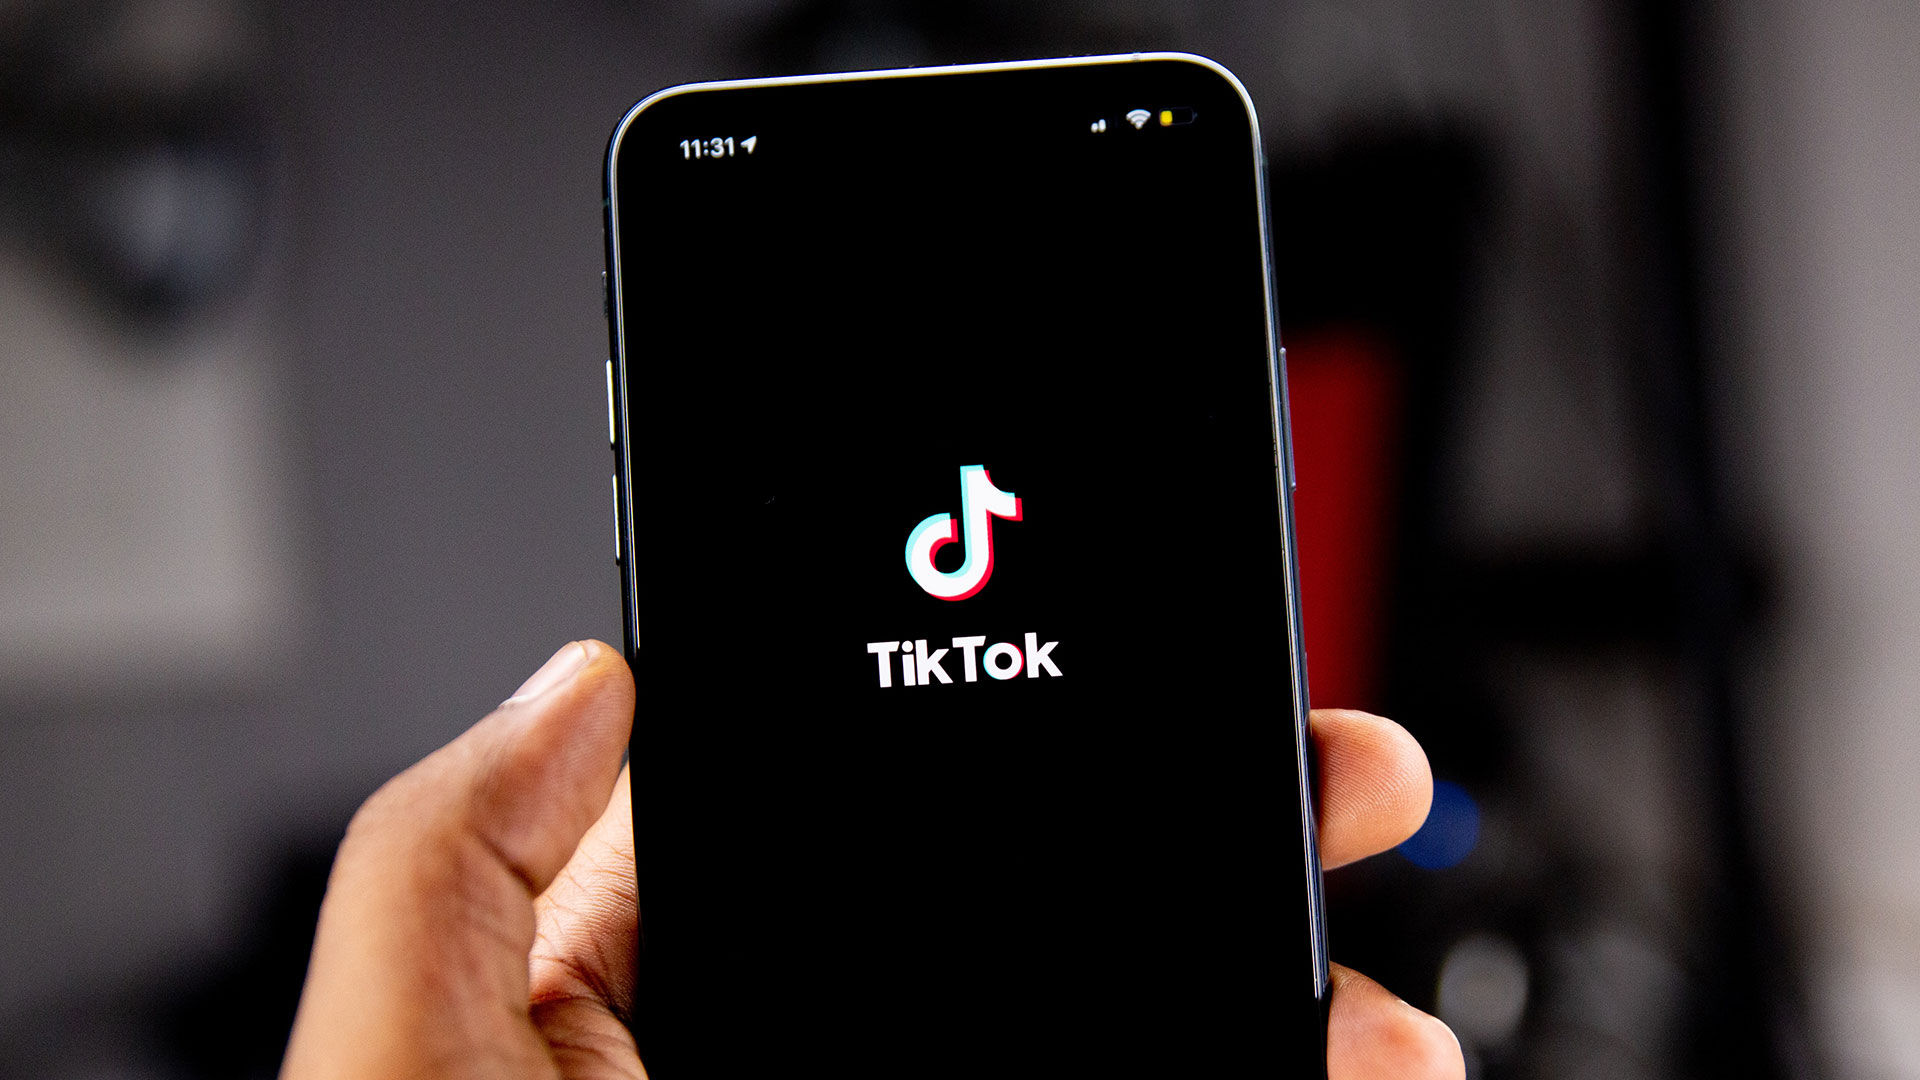 How to Join TikTok Testers on iOS